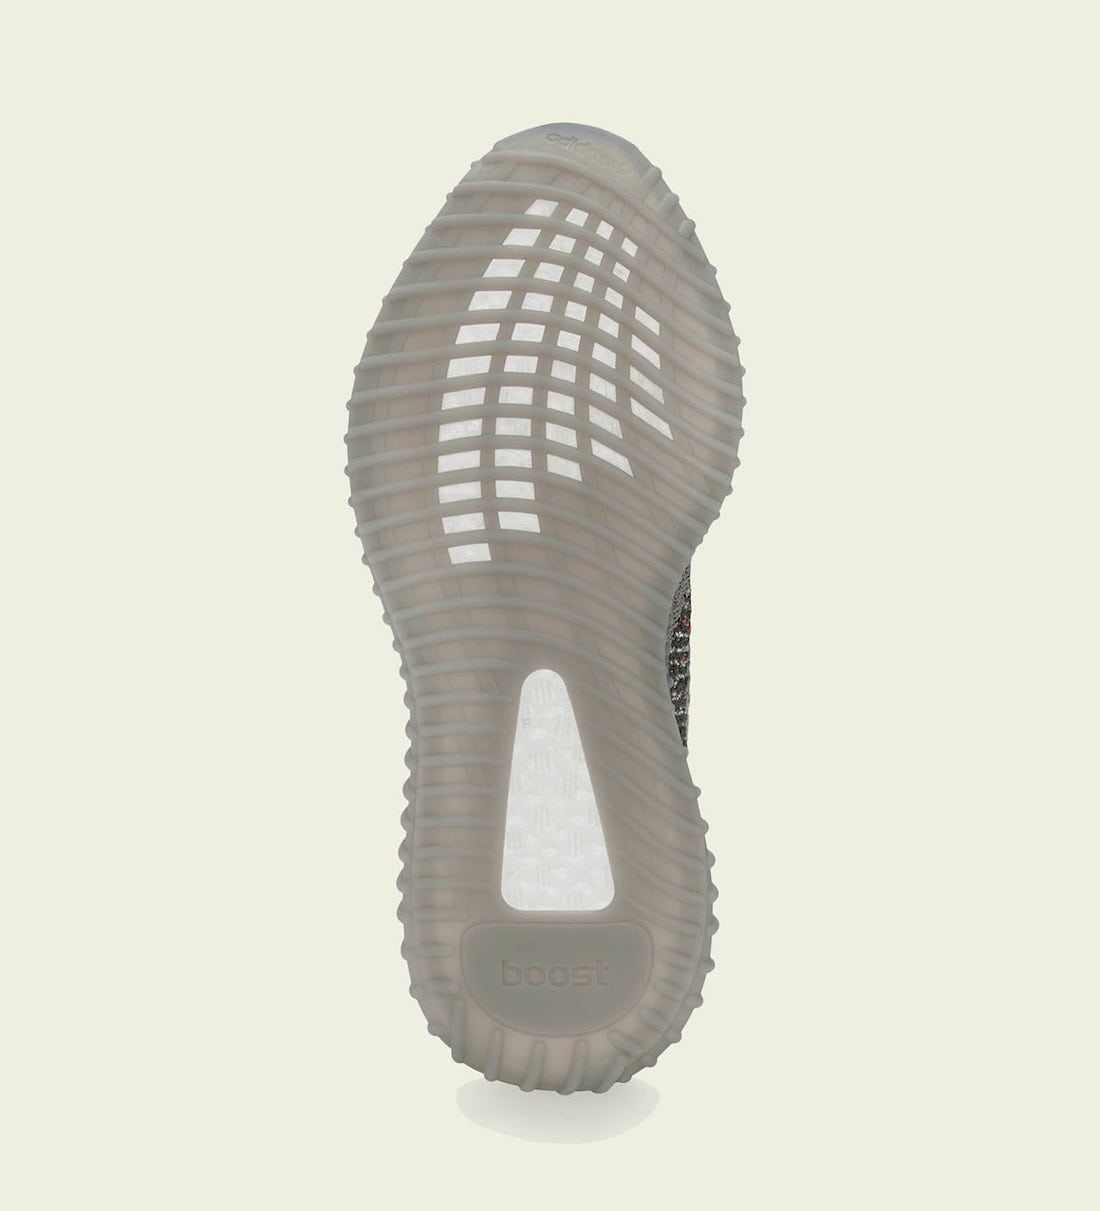 adidas-Yeezy-Boost-350-V2-Beluga-Reflective-GW1229-Release-Date-Price-4